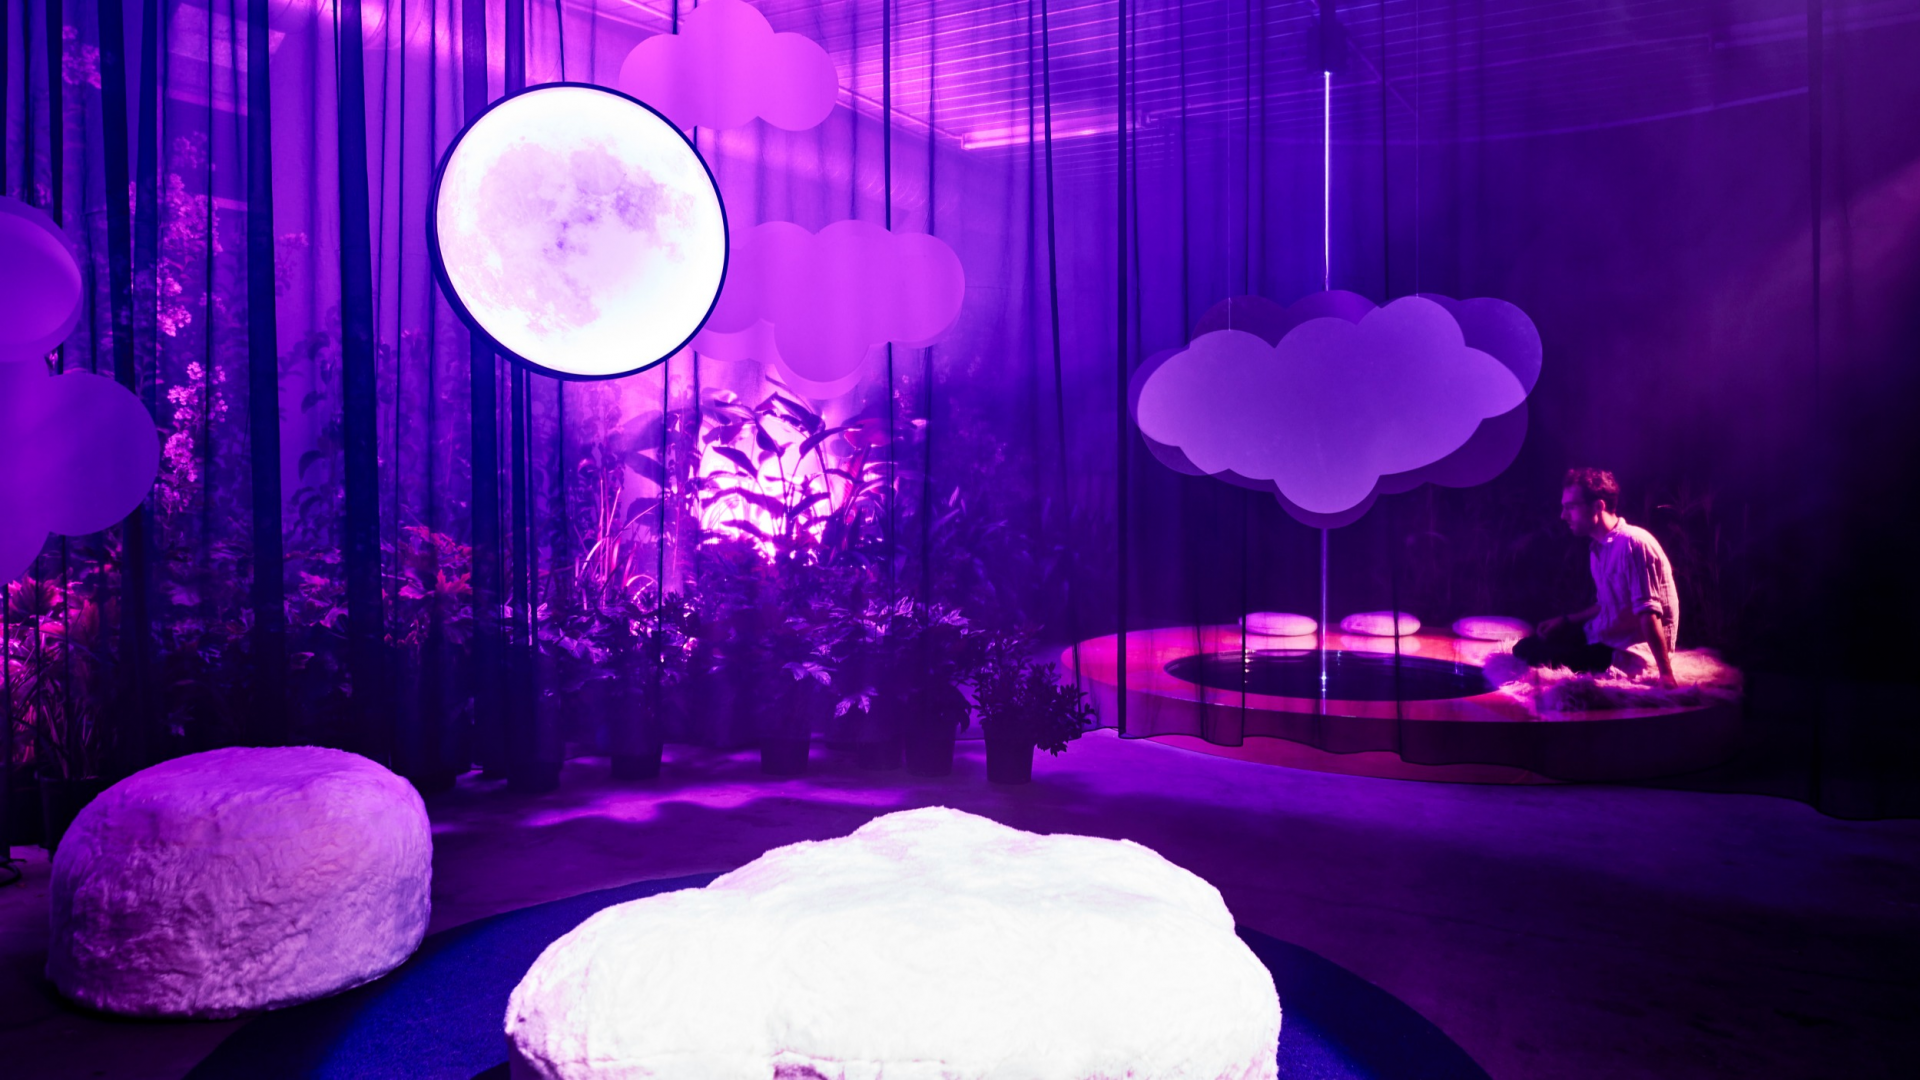 moon, cloud bench, floating clouds, water, reflecting pool, mood lighting, sweet rain forest sound and scent